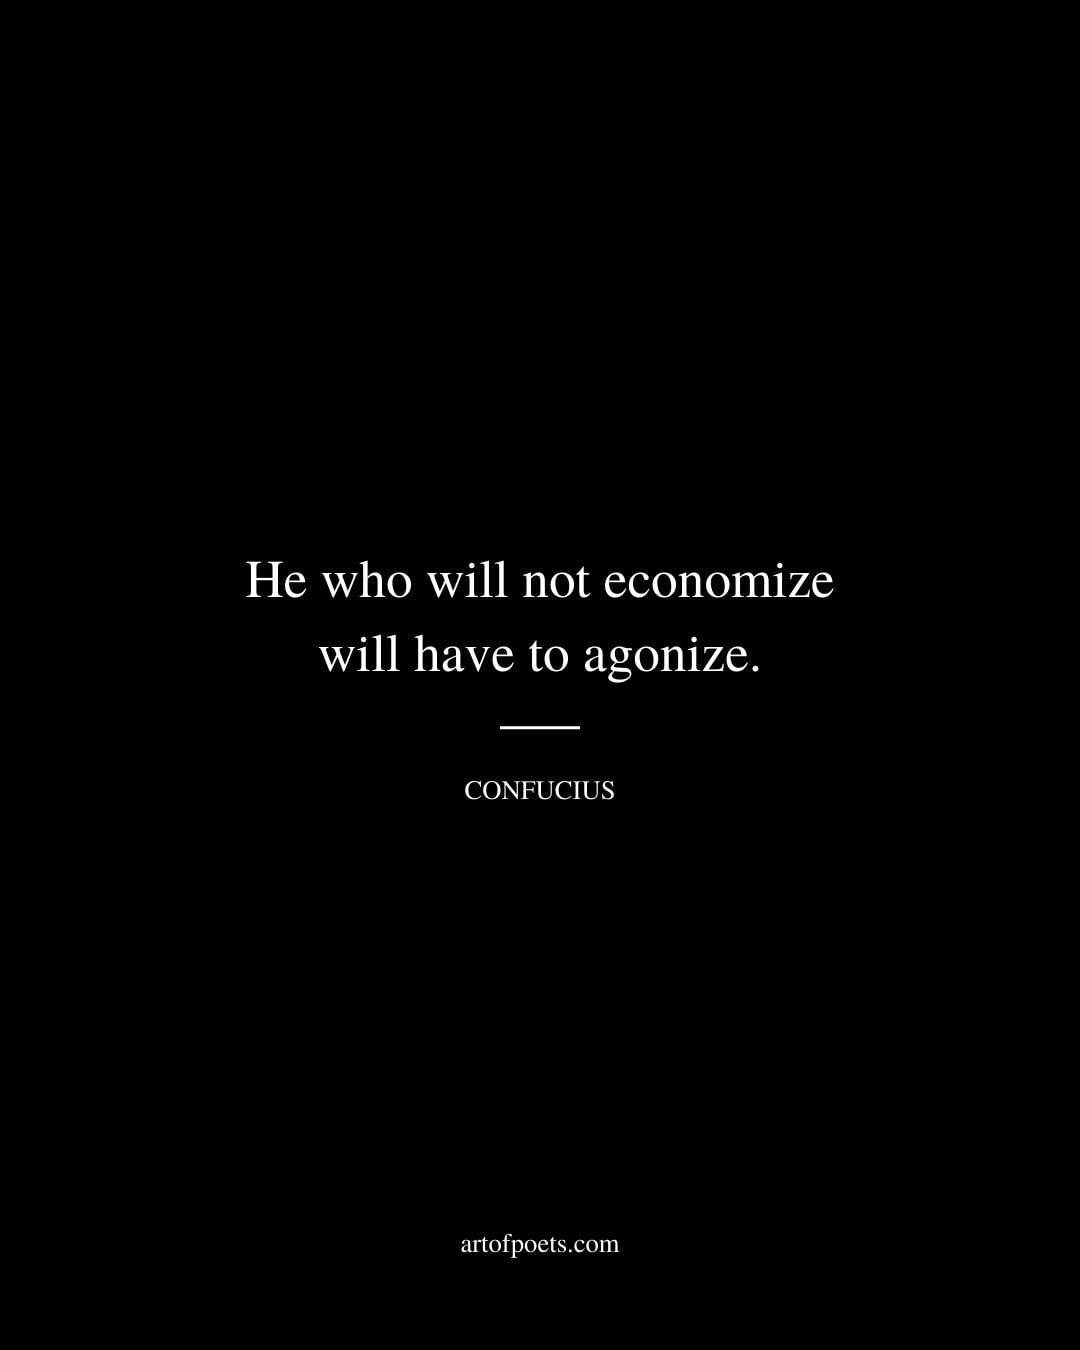 He who will not economize will have to agonize